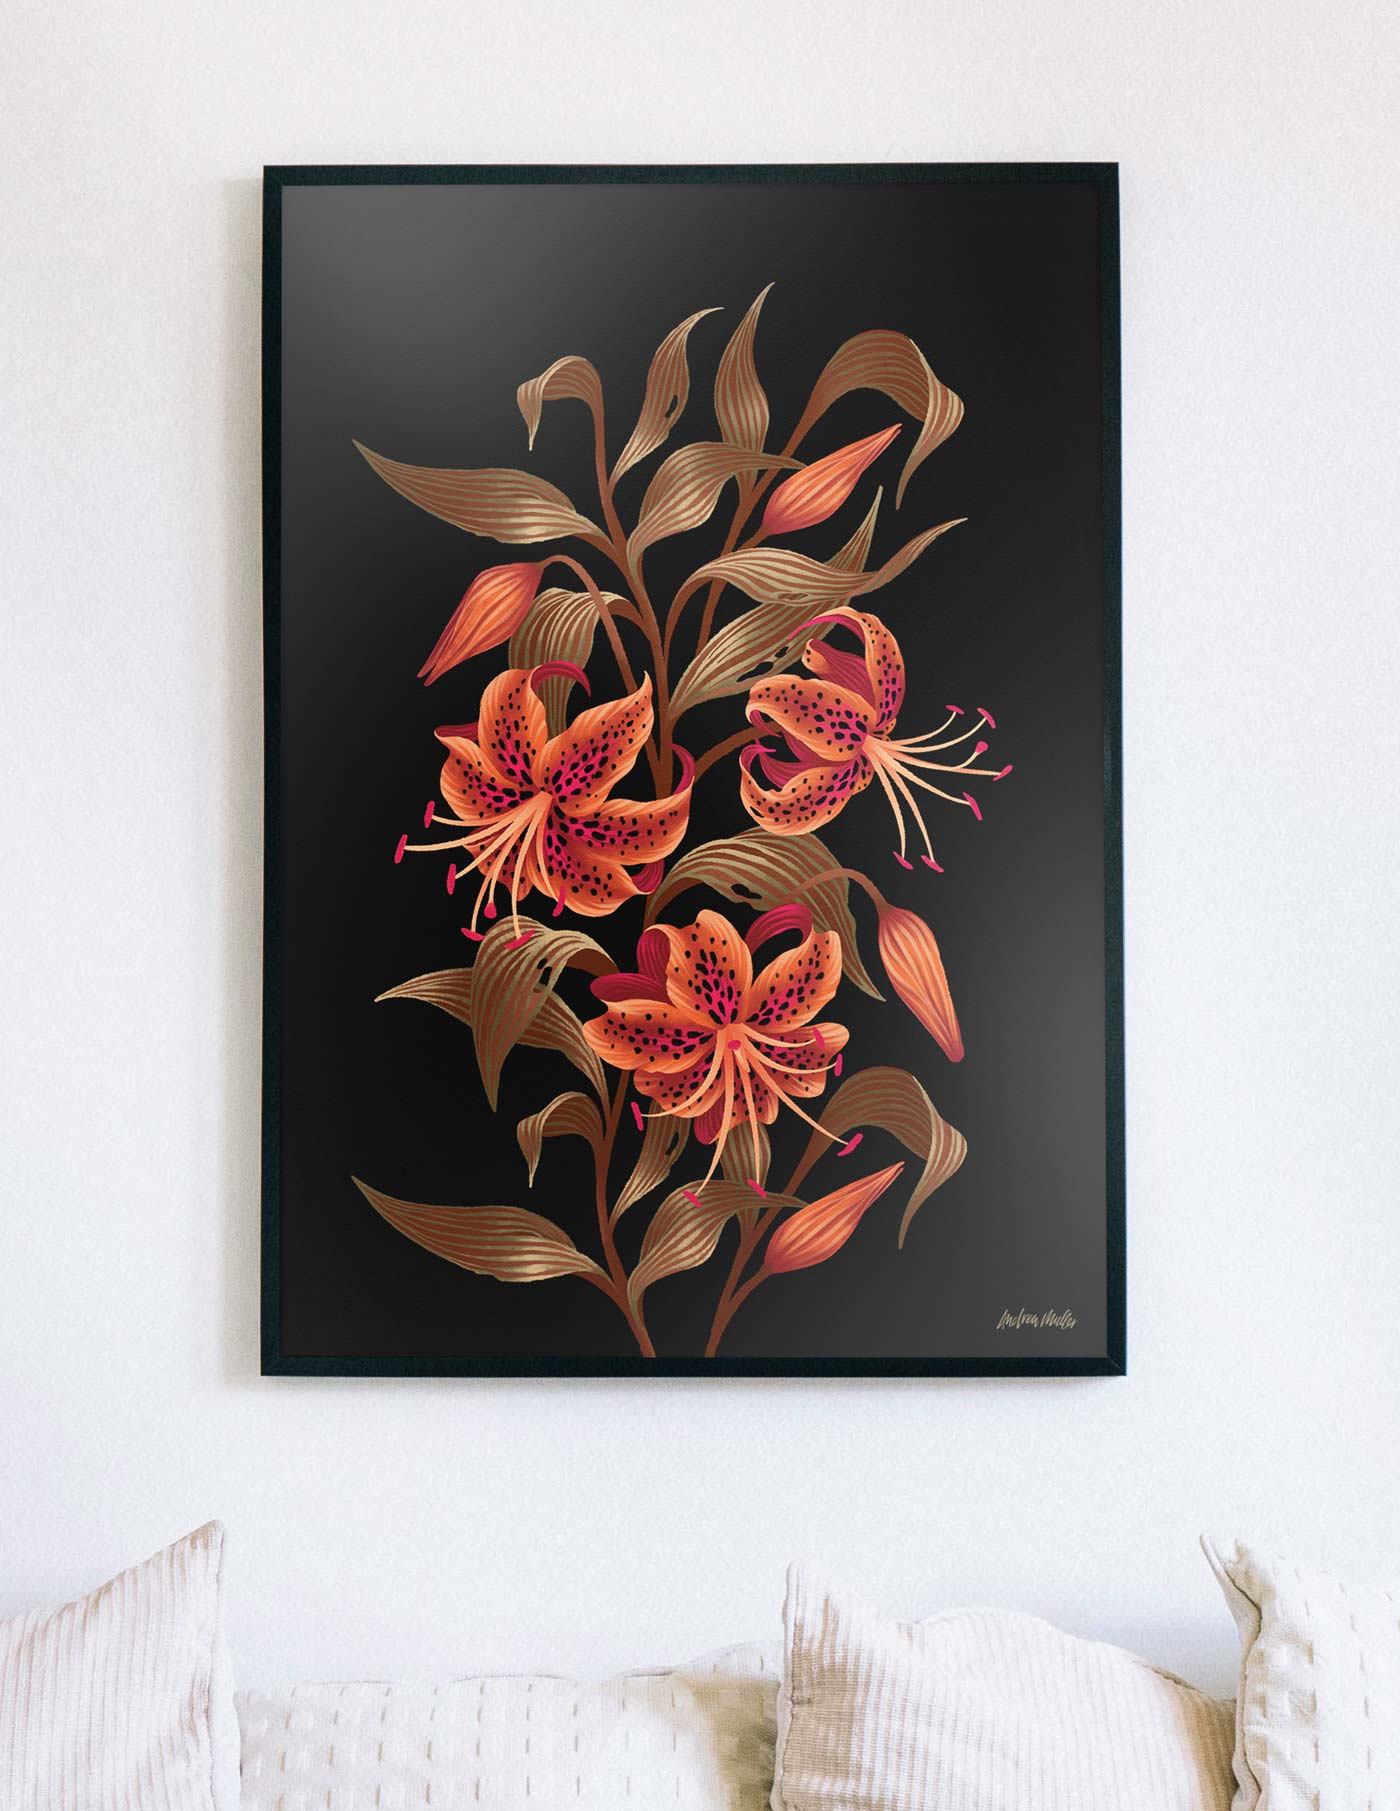 Art print of tiger lily flower on black background by Andrea Muller